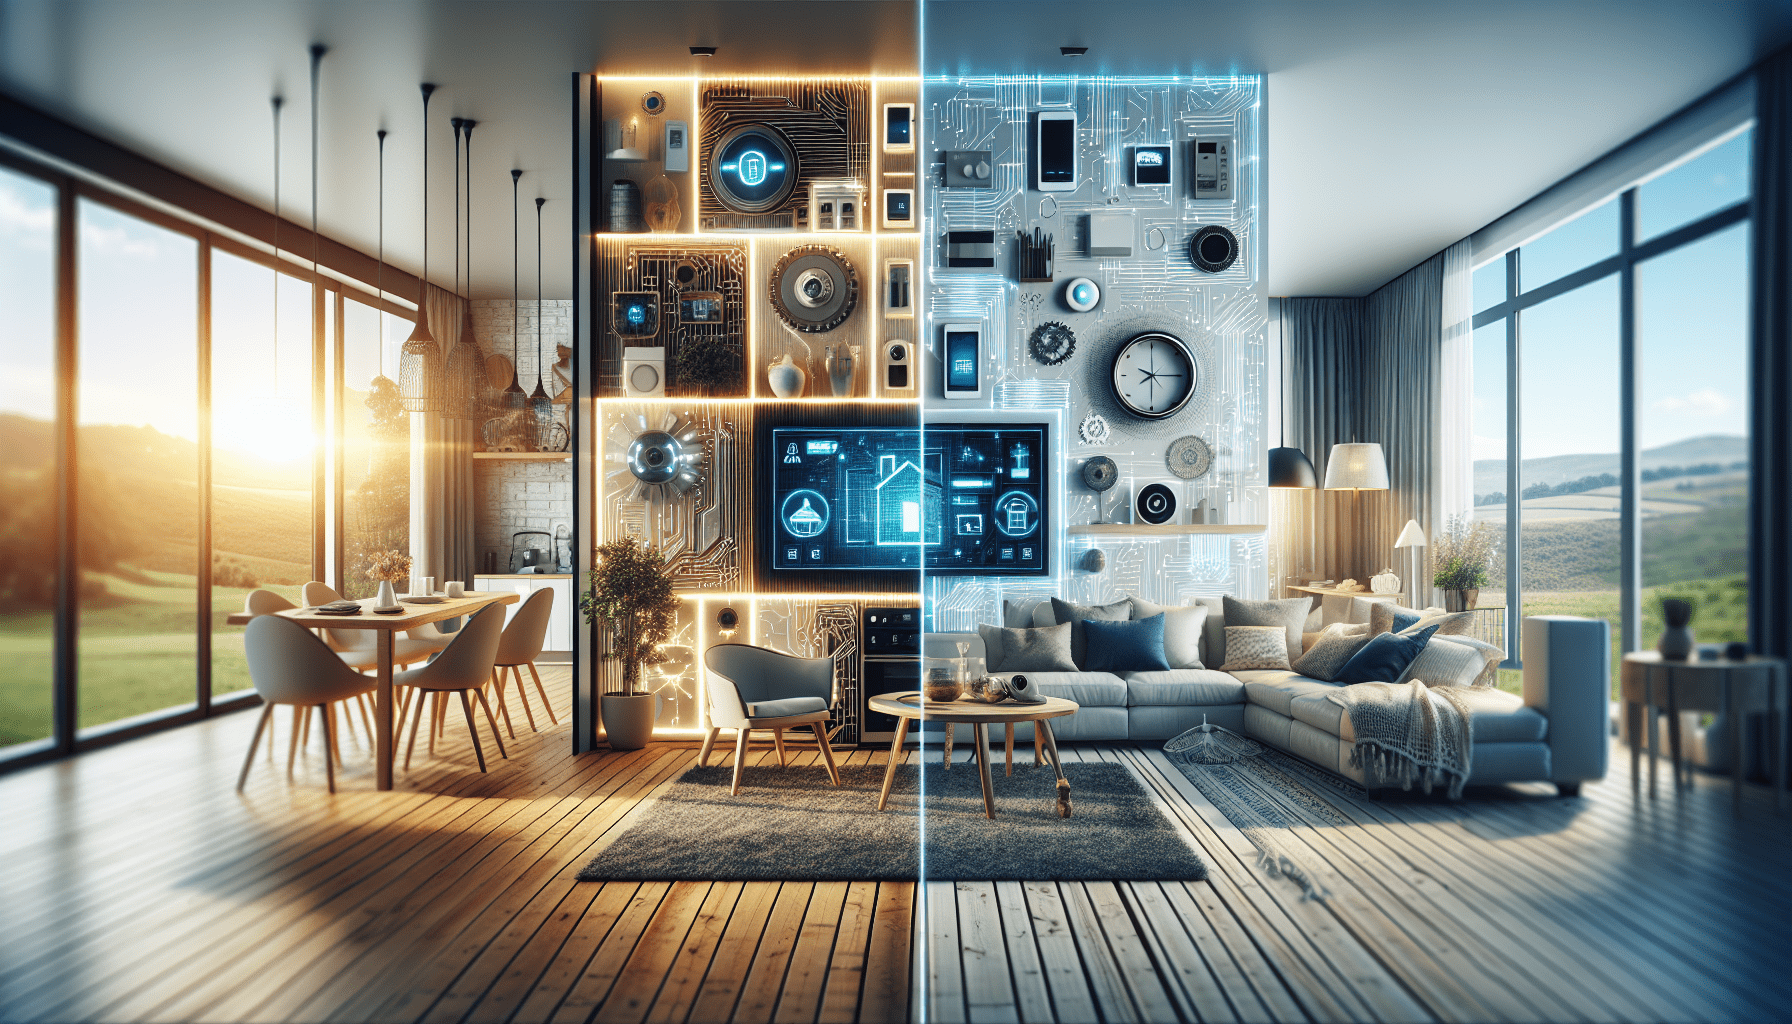 What Is The Difference Between A Smart Home And A Normal Home?